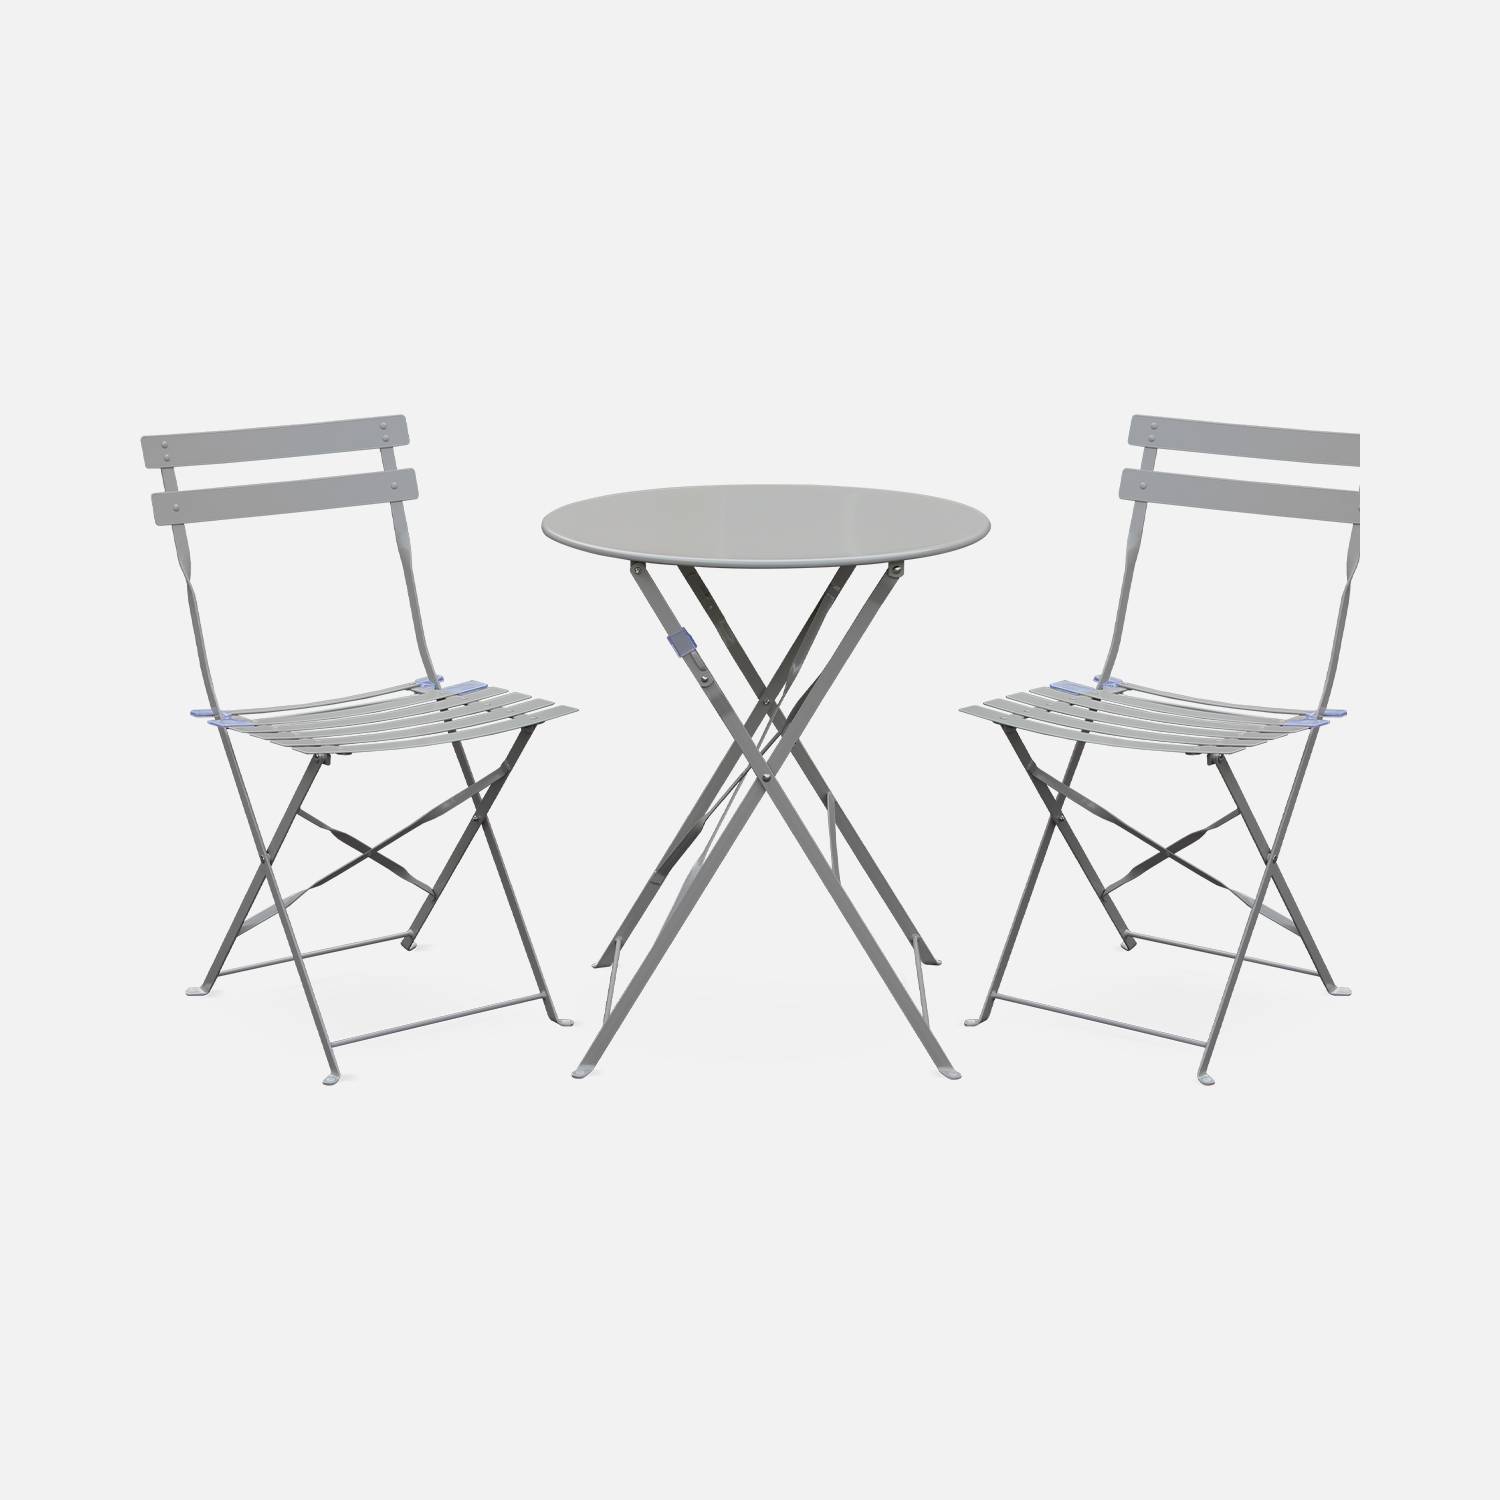 2-seater foldable thermo-lacquered steel bistro garden table with chairs, Ø60cm - Emilia - Taupe grey Photo2